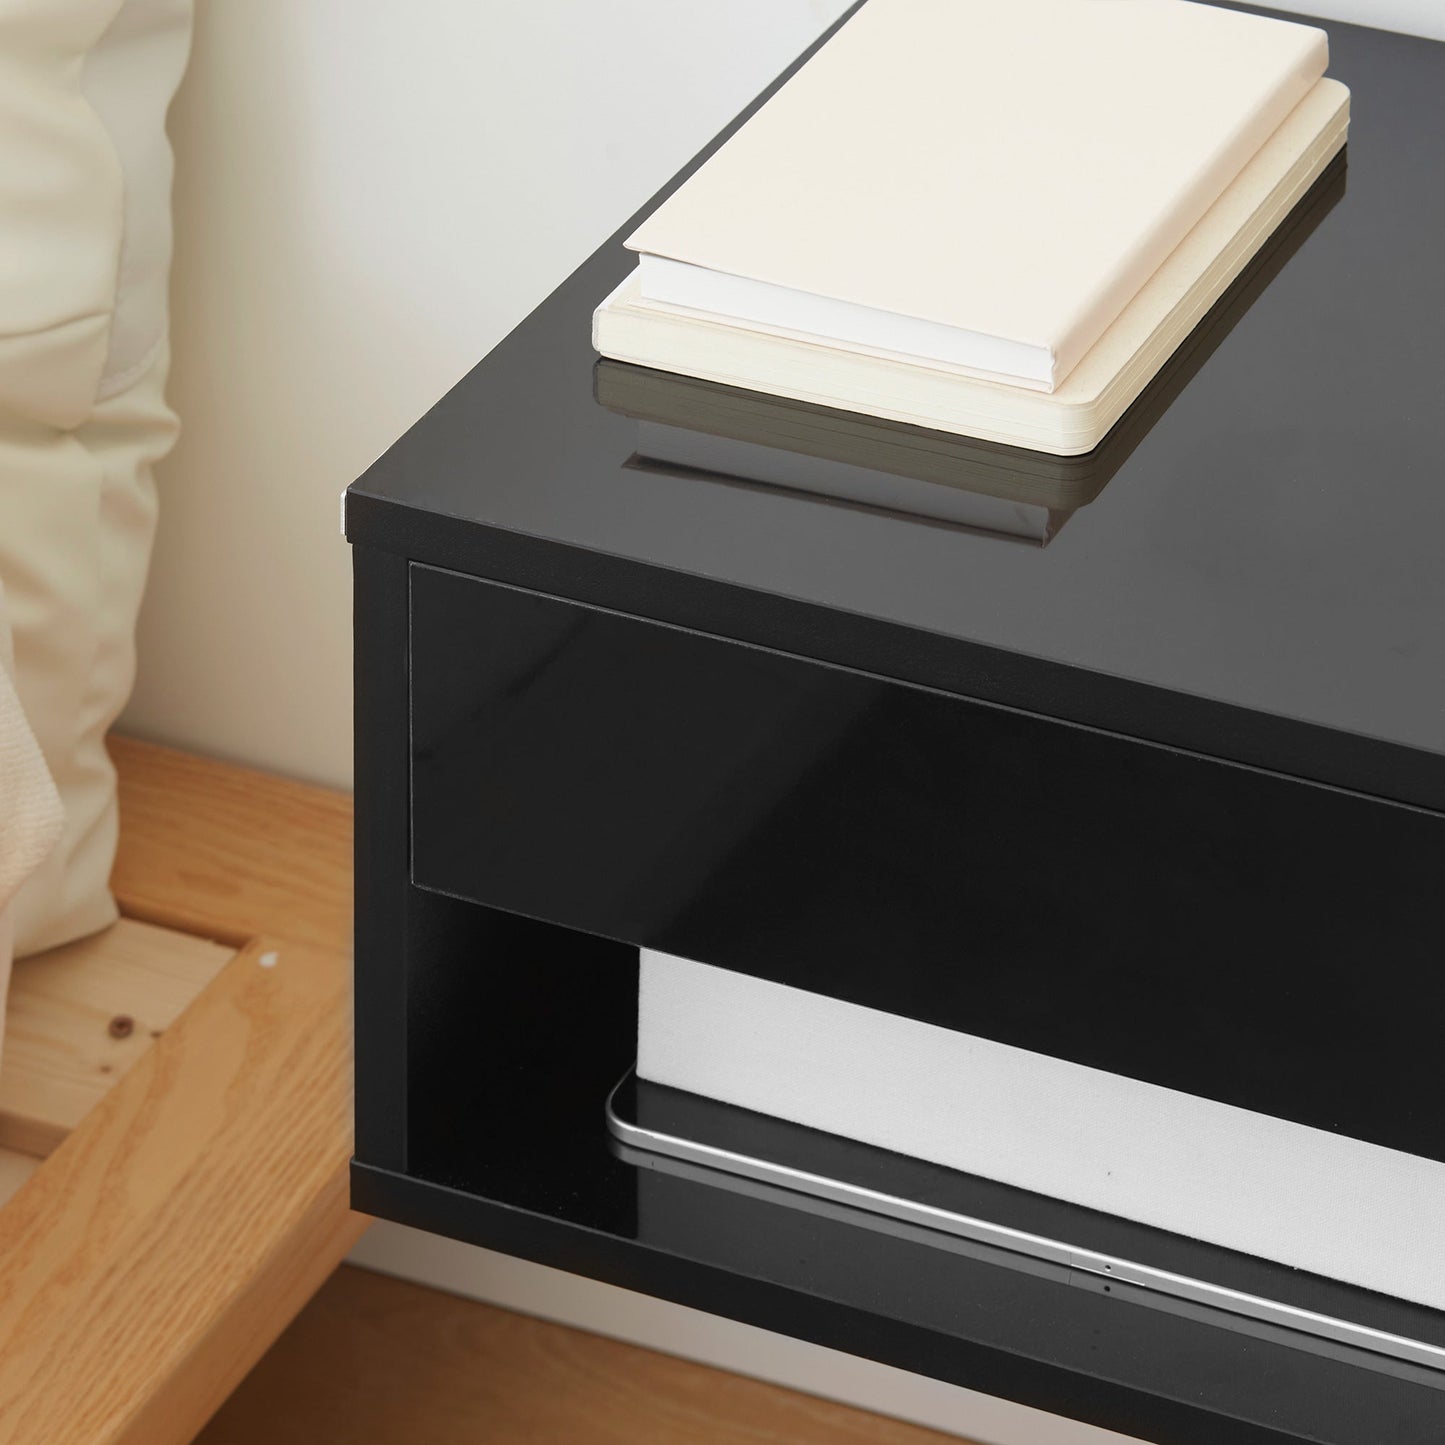 HOMCOM 2 Pieces Bedside Table Wall Mounted Nightstand with Drawer and Shelf for Bedroom, 37 x 32 x 21cm, High Gloss Black